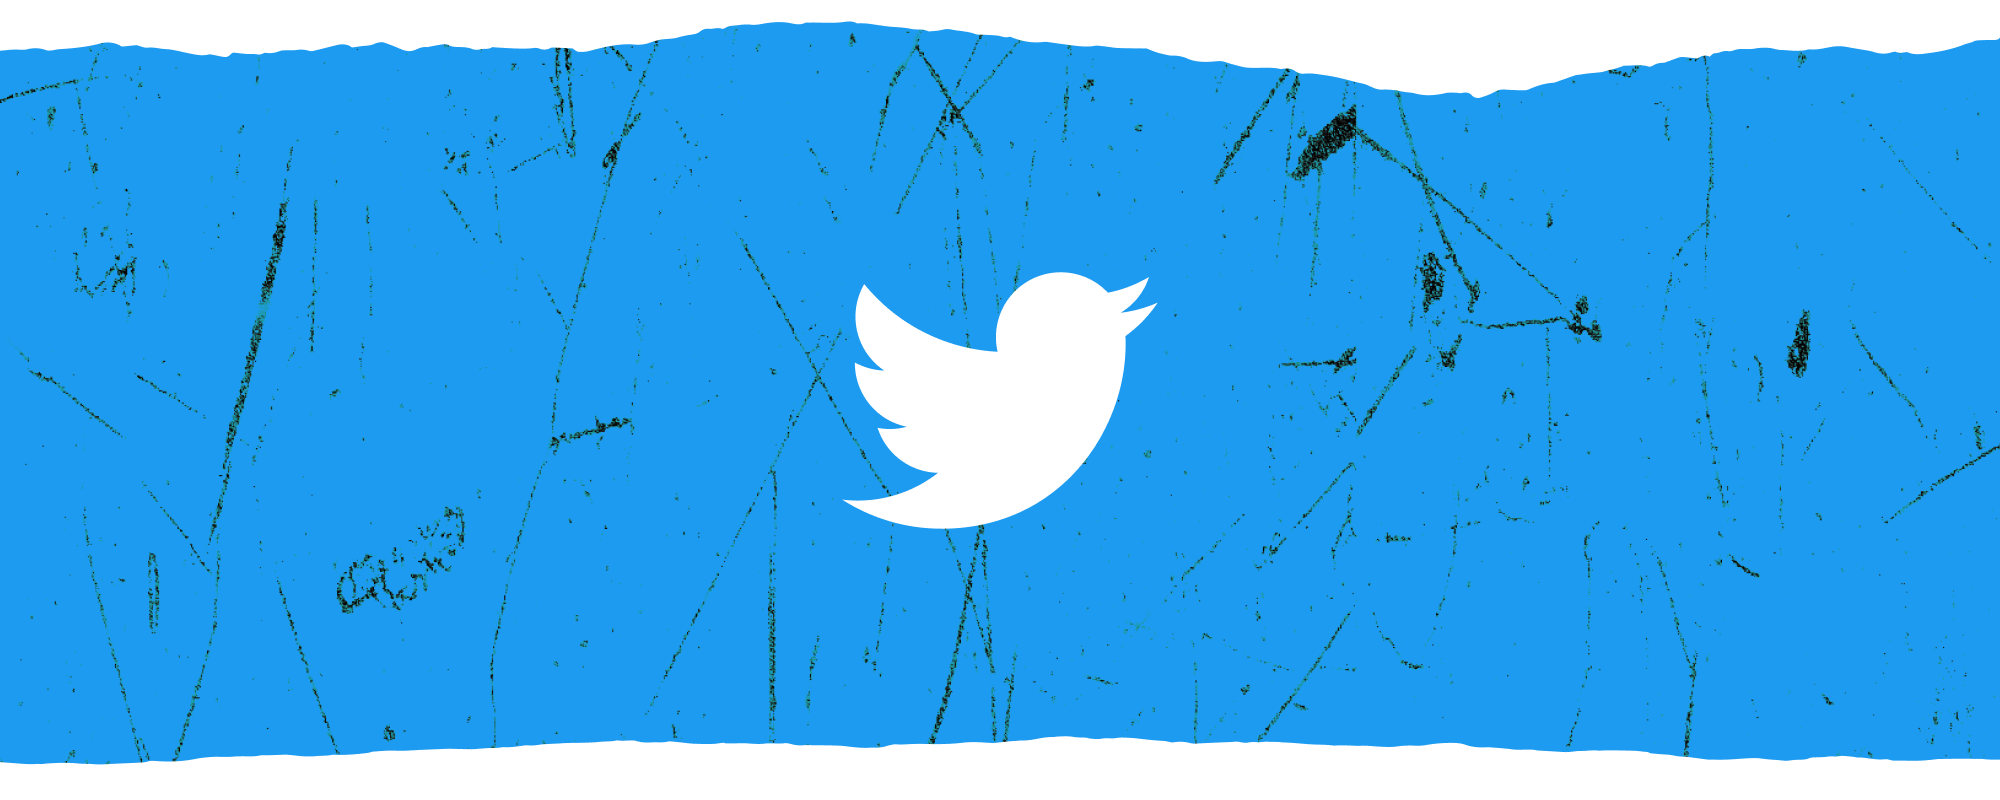 White Twitter logo in front of a textured horizontal banner of blue overlaid on white